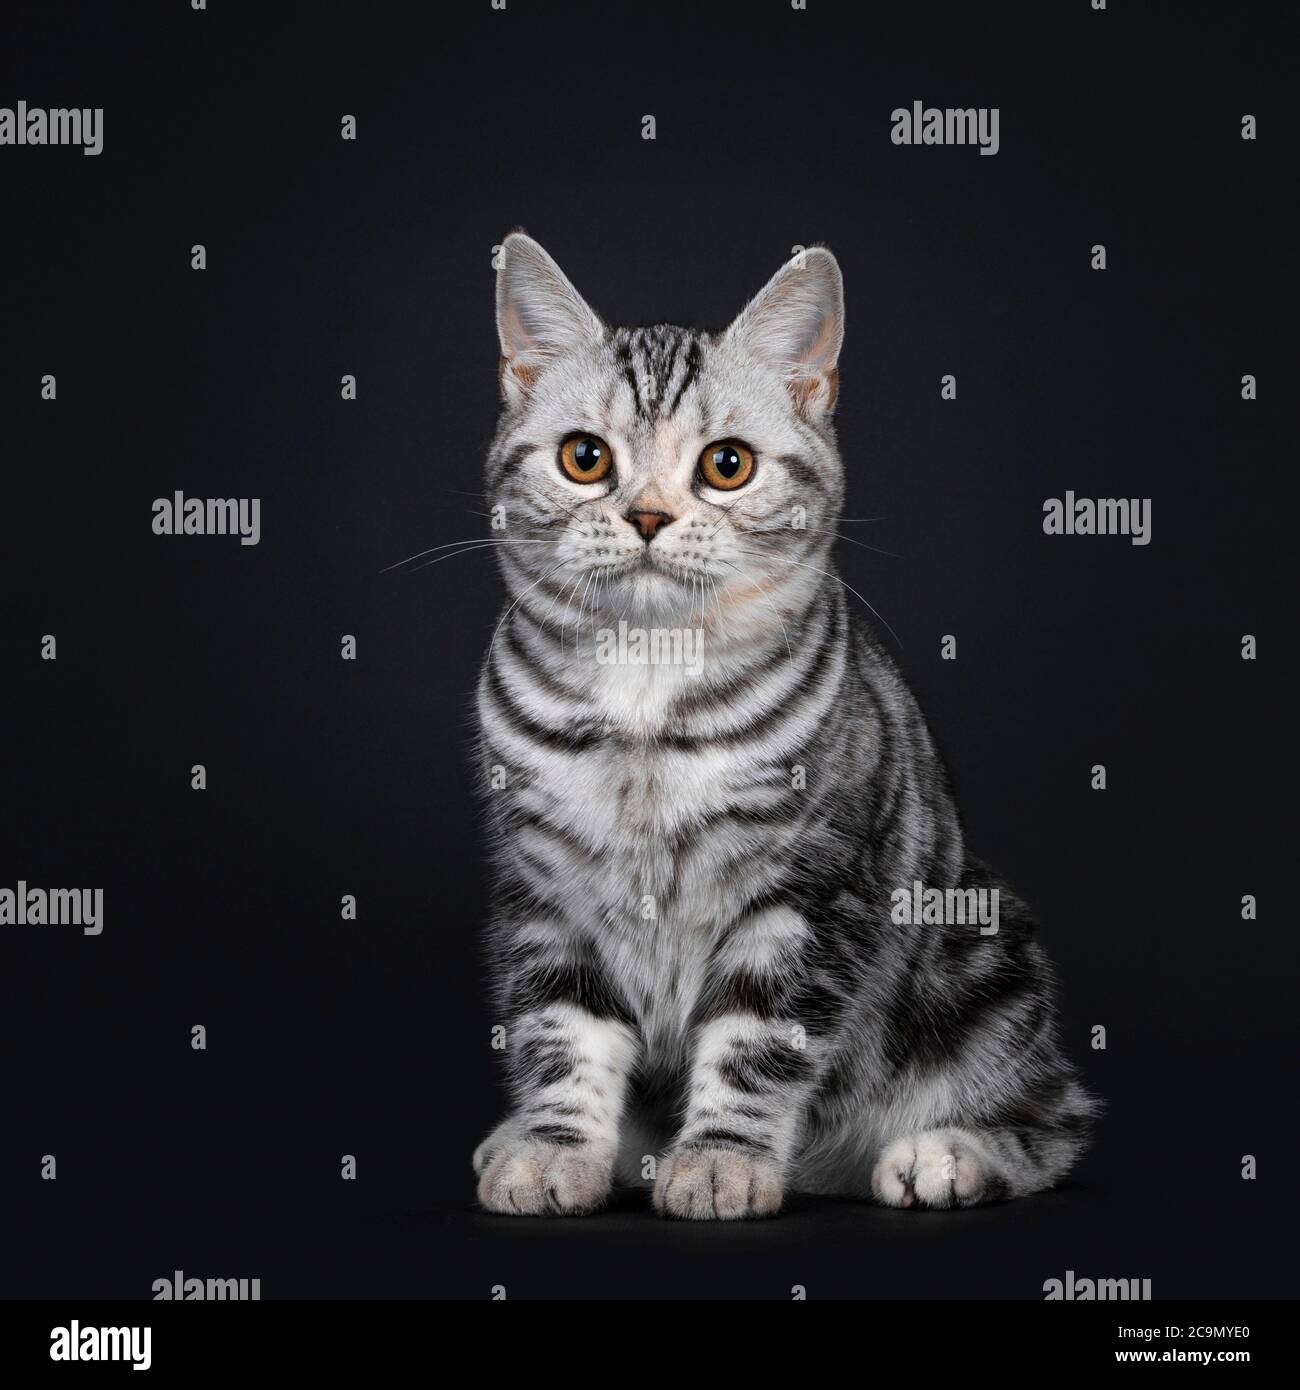 Cute silver tortie American Shorthair cat kitten, sitting side ways. Looking beside camera with orange eyes. Isolated on black background. Stock Photo